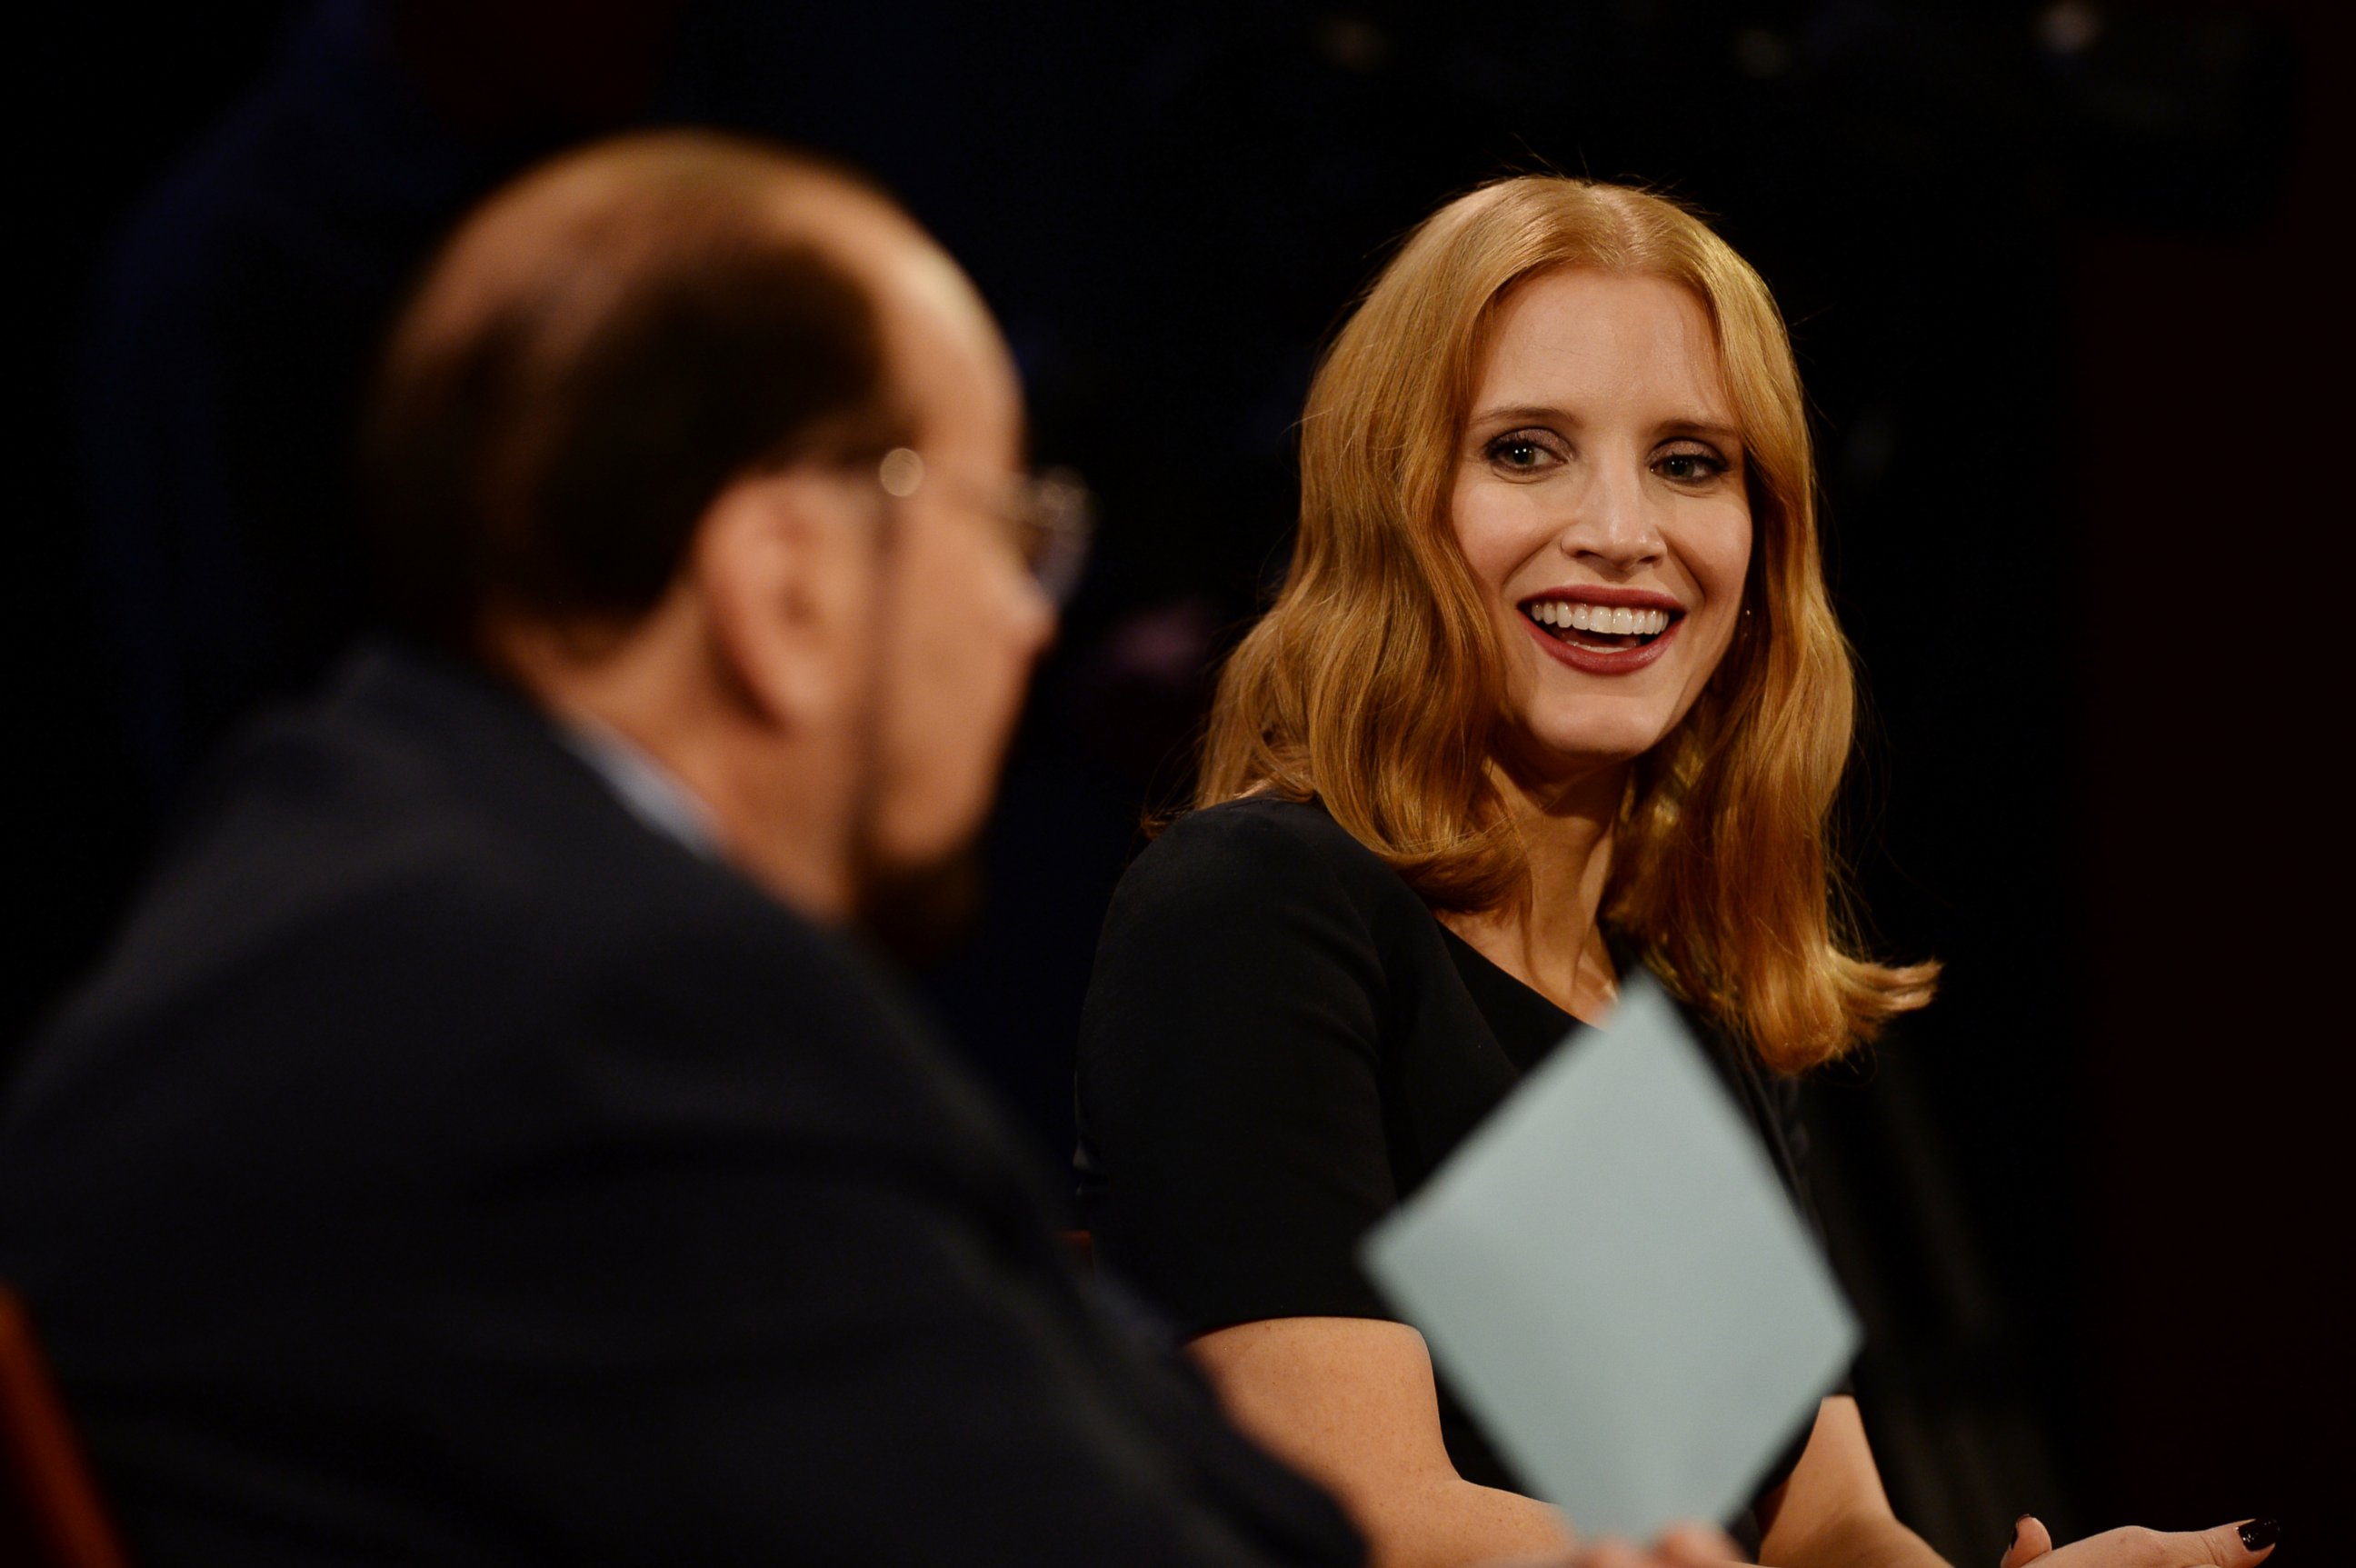 PHOTO: Jessica Chastain is interviewed by host James Lipton on "Inside the Actors Studio," Dec. 4, 2016.